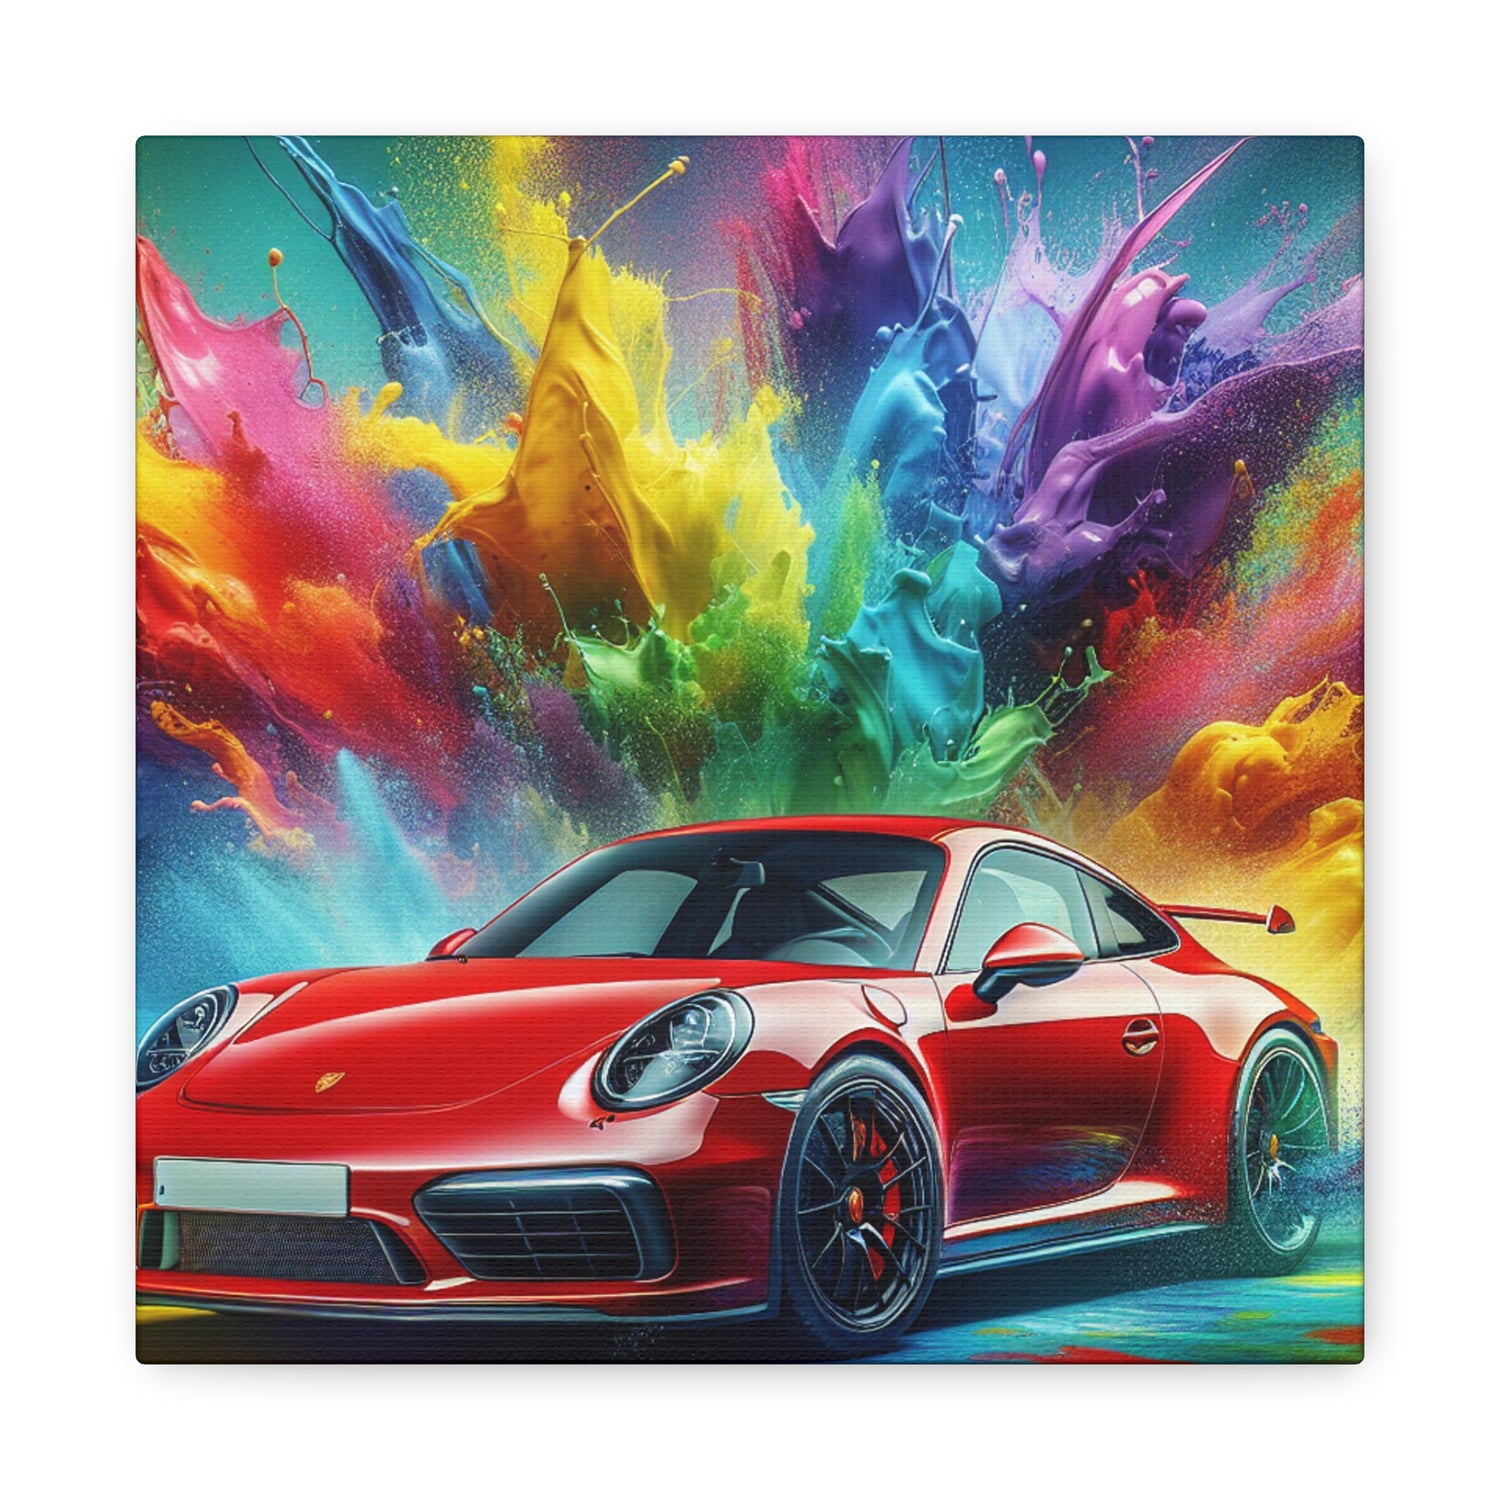 Porsche 911 Fine Art Canva Painting - Vintage Car Wall Decor - Luxury Automobile Artwork for Home and Office Decorations